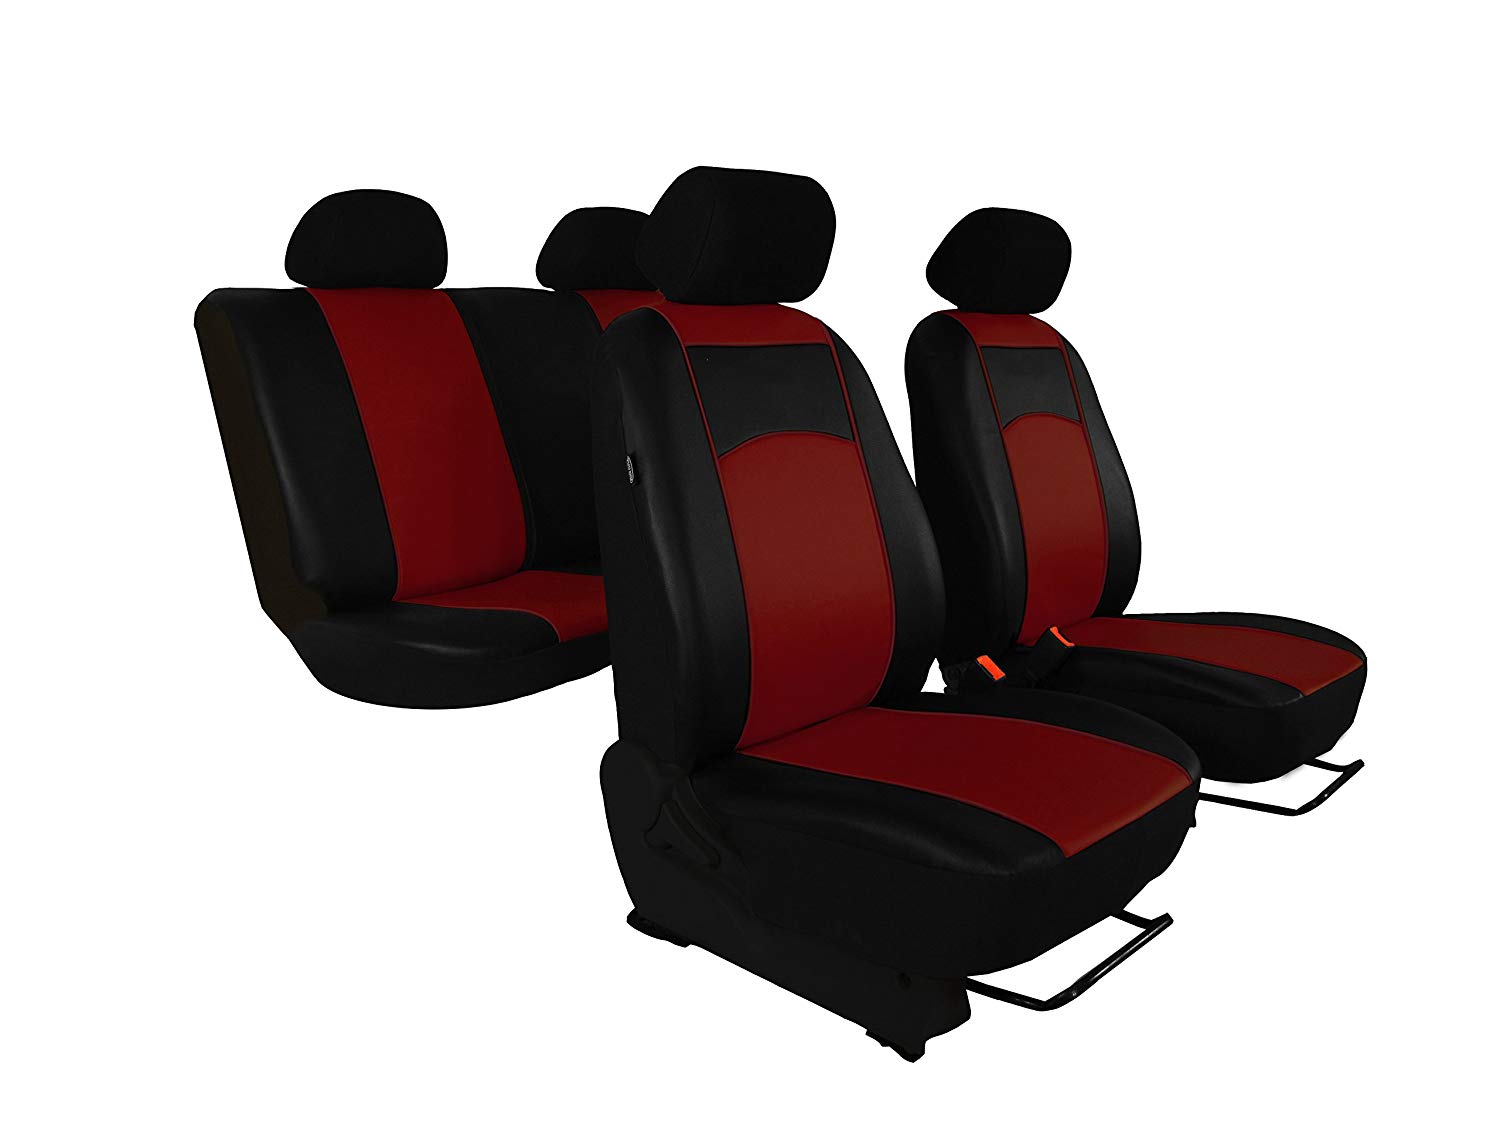 \'Universal Imitation Leather Seat Cover Set for Tuning i10 i Design Faux Leather with Decorative Outside. This offer Deep Red